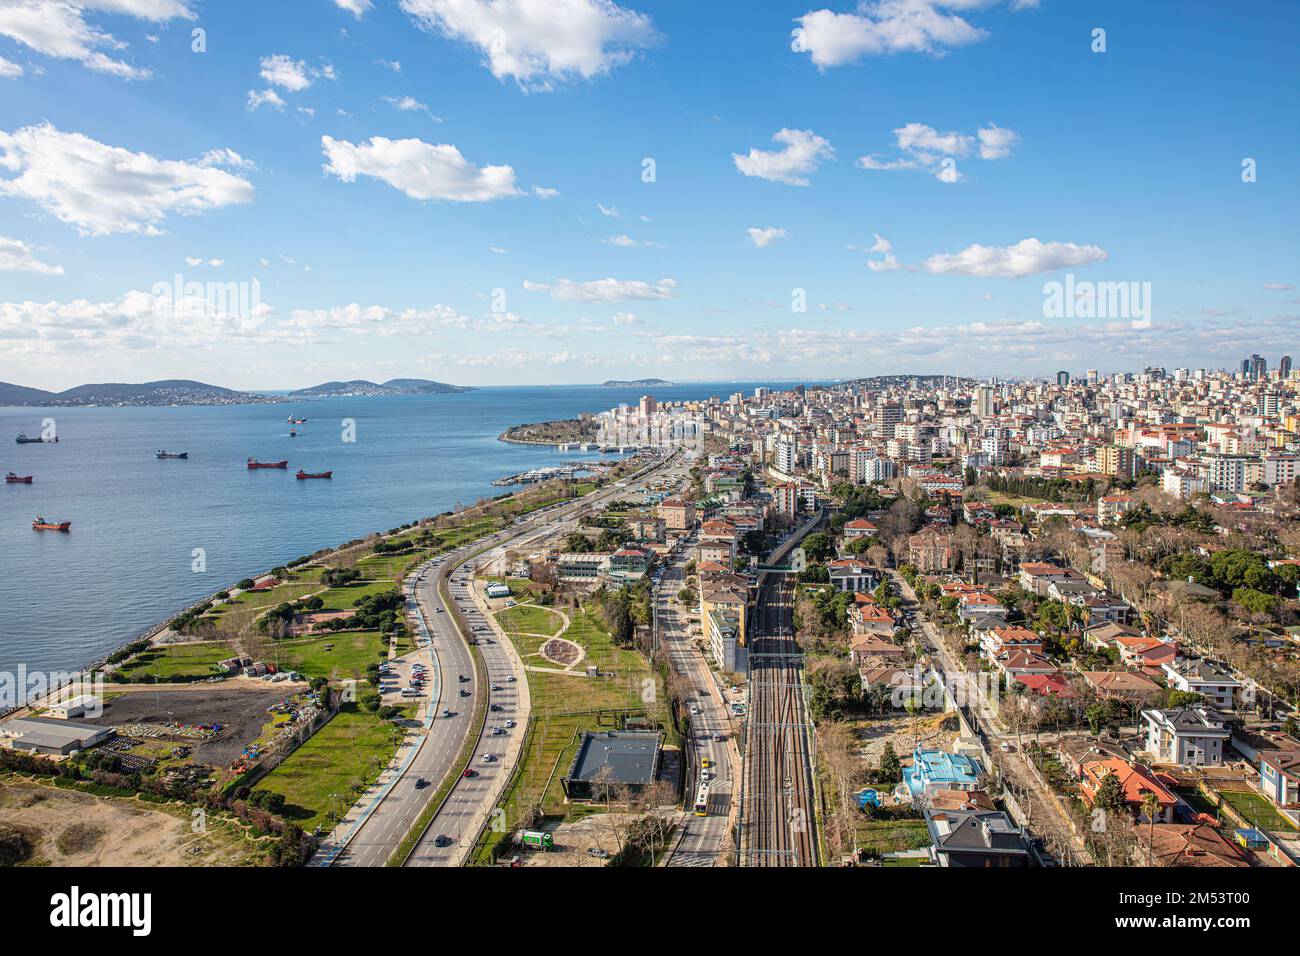 Istanbul Anatolian side coastline, islands and the Sea of Marmara. Kartal coast, modern buildings and housing situation view from IstMarina Shopping C Stock Photo